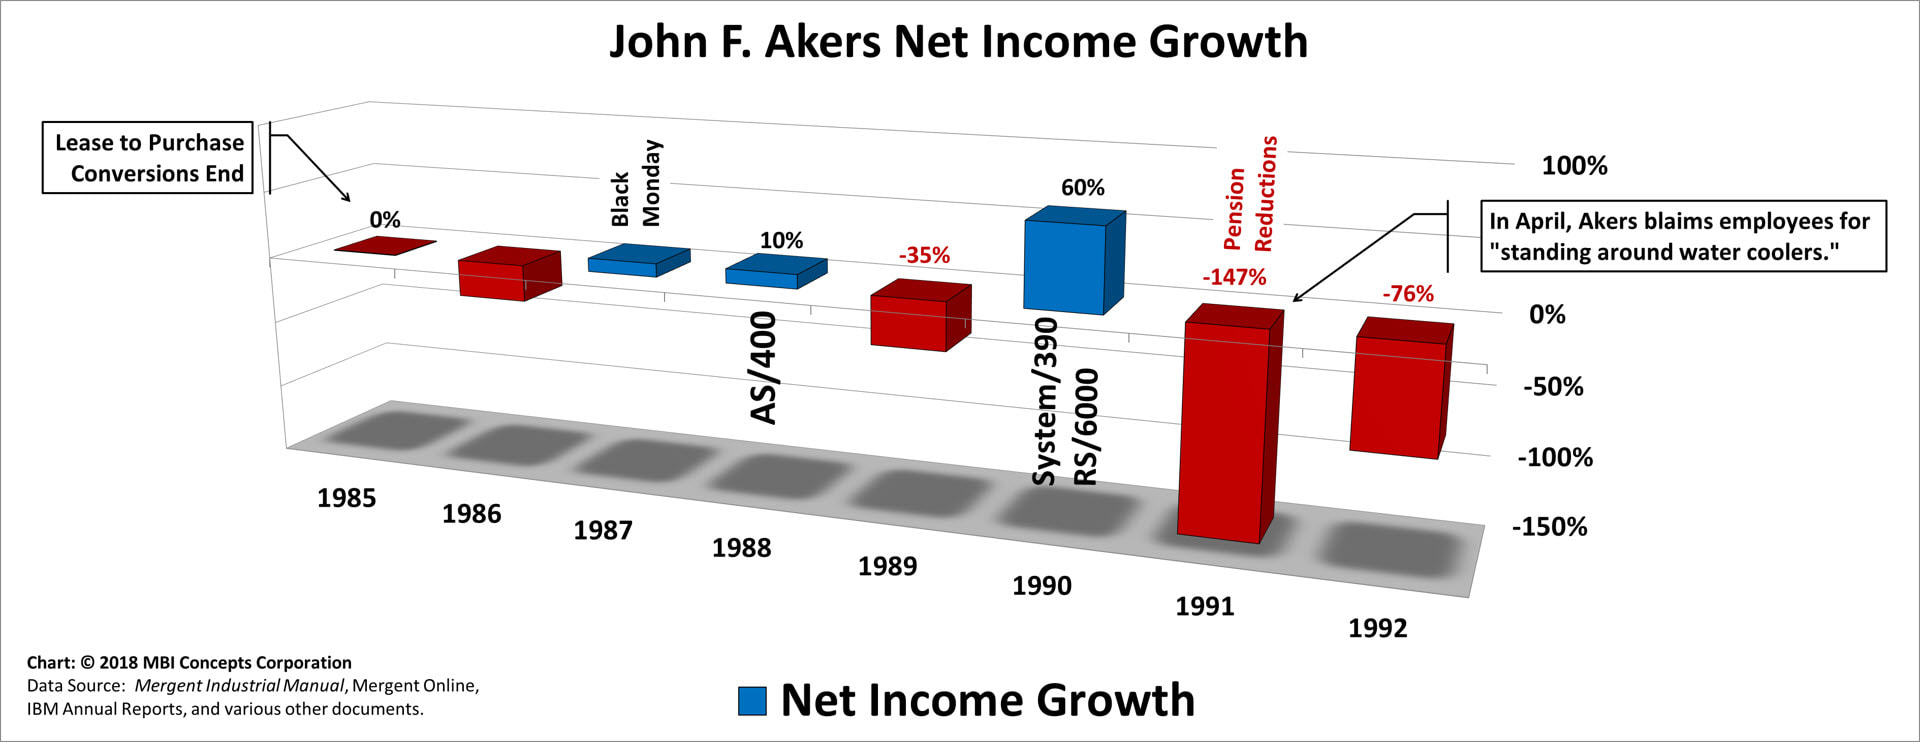 A color bar chart showing IBM's net income (profit) growth from 1985 to 1992 for John F. Akers.